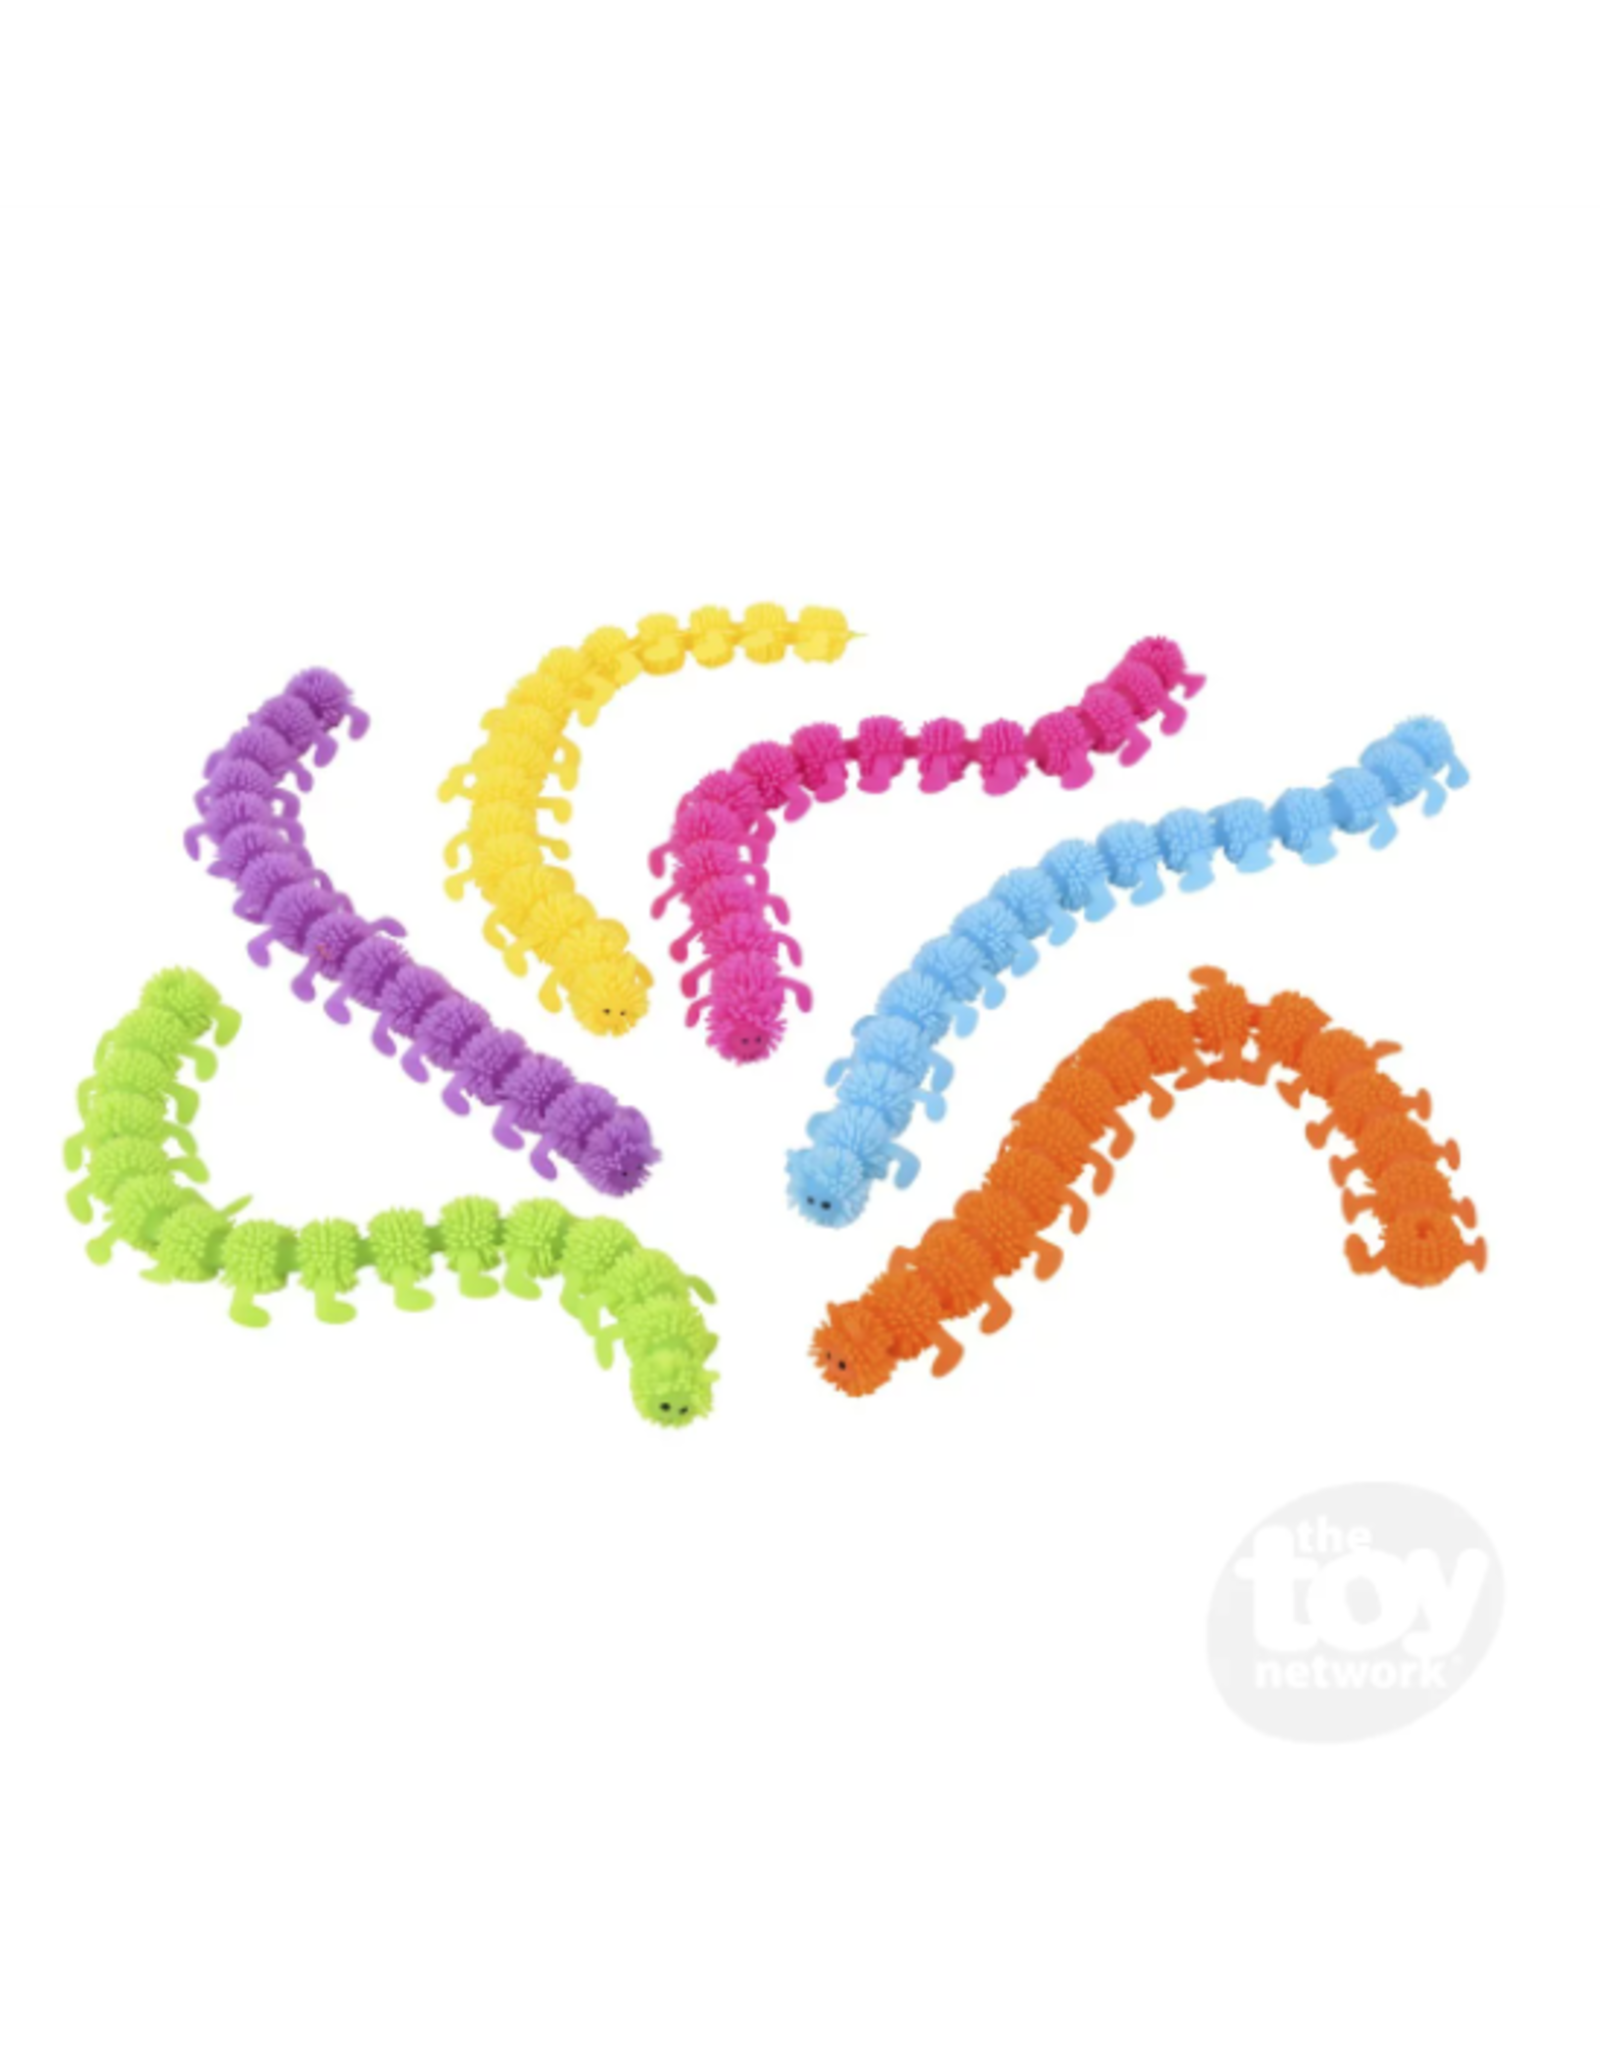 The Toy Network 9.5" Caterpillar Stretchy String